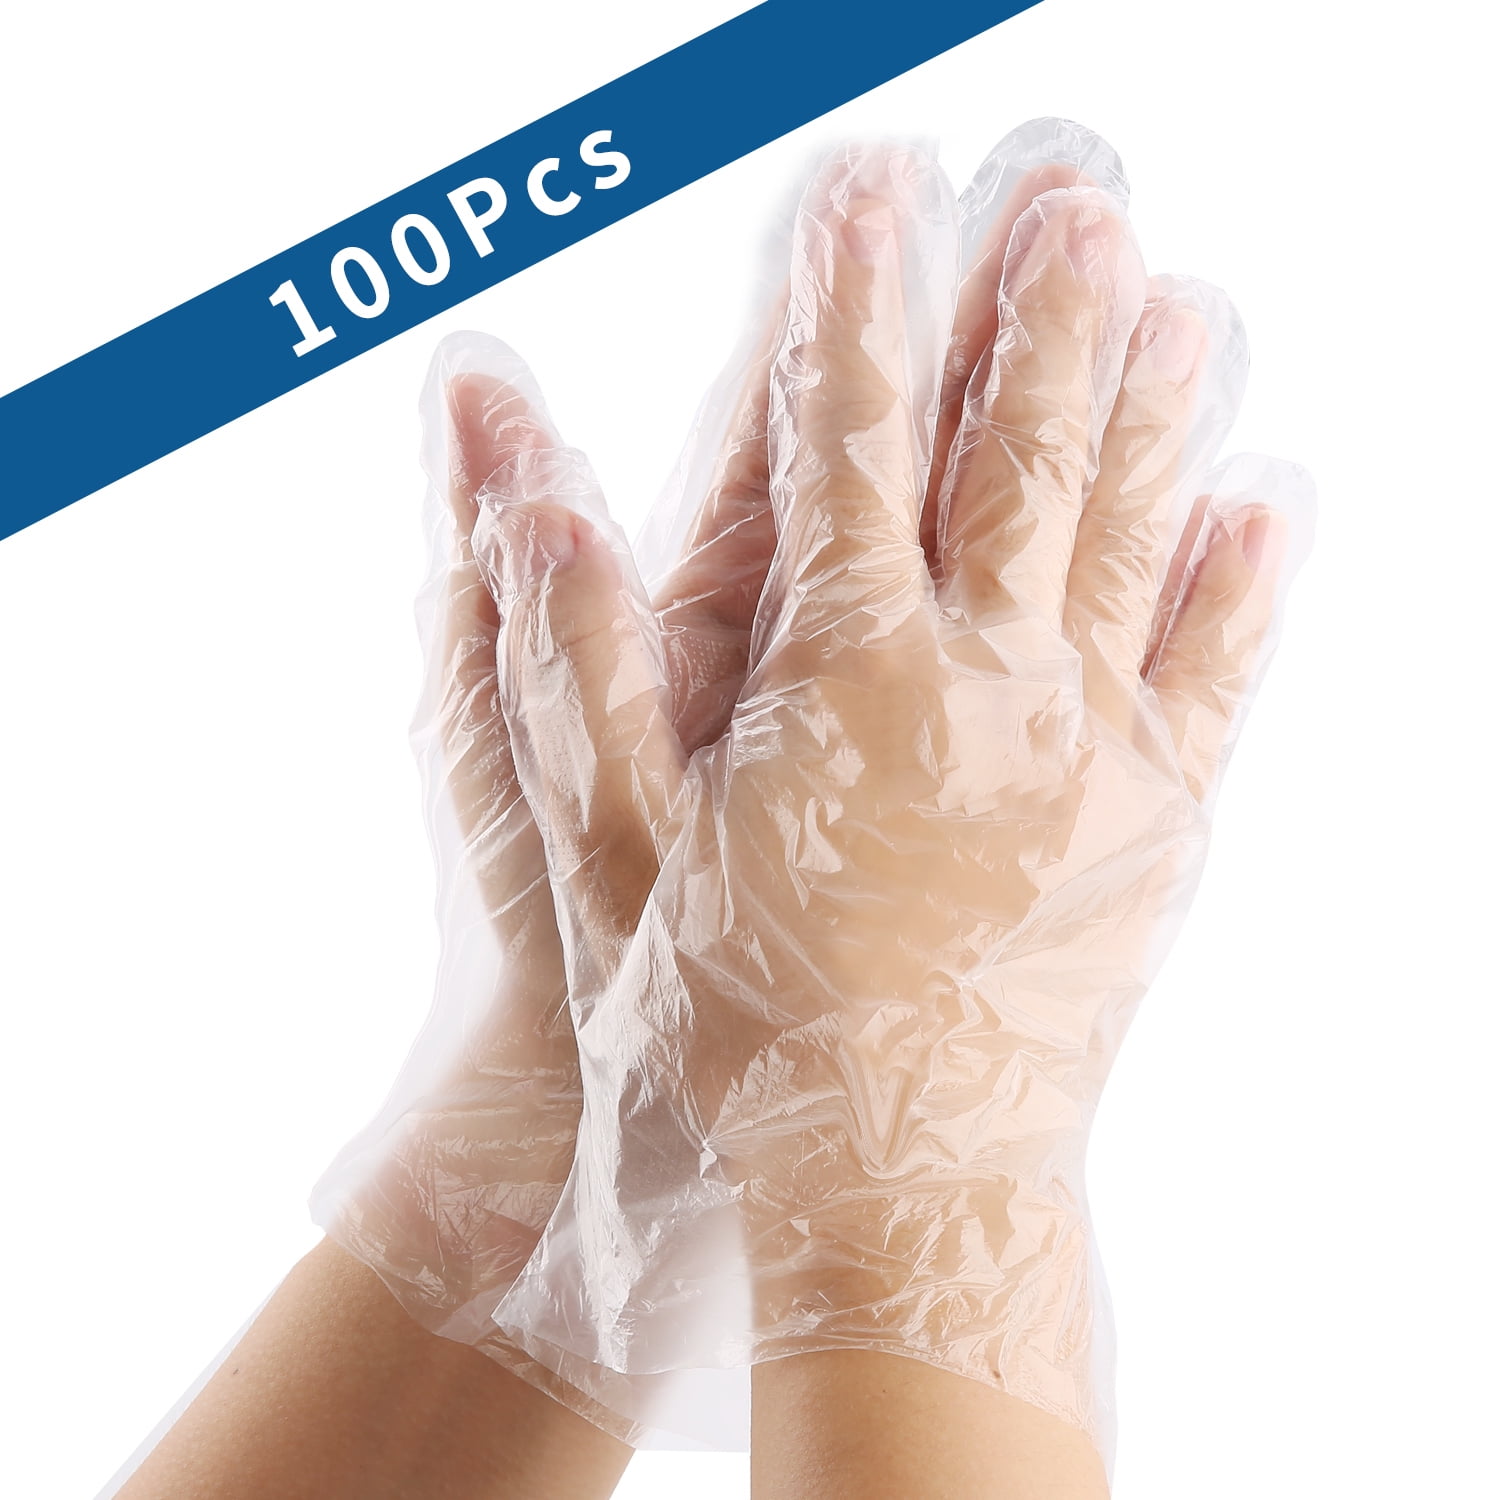 100PCS Disposable Plastic Gloves Food Natural Rubber Vinyl Clear Safety Hygiene 